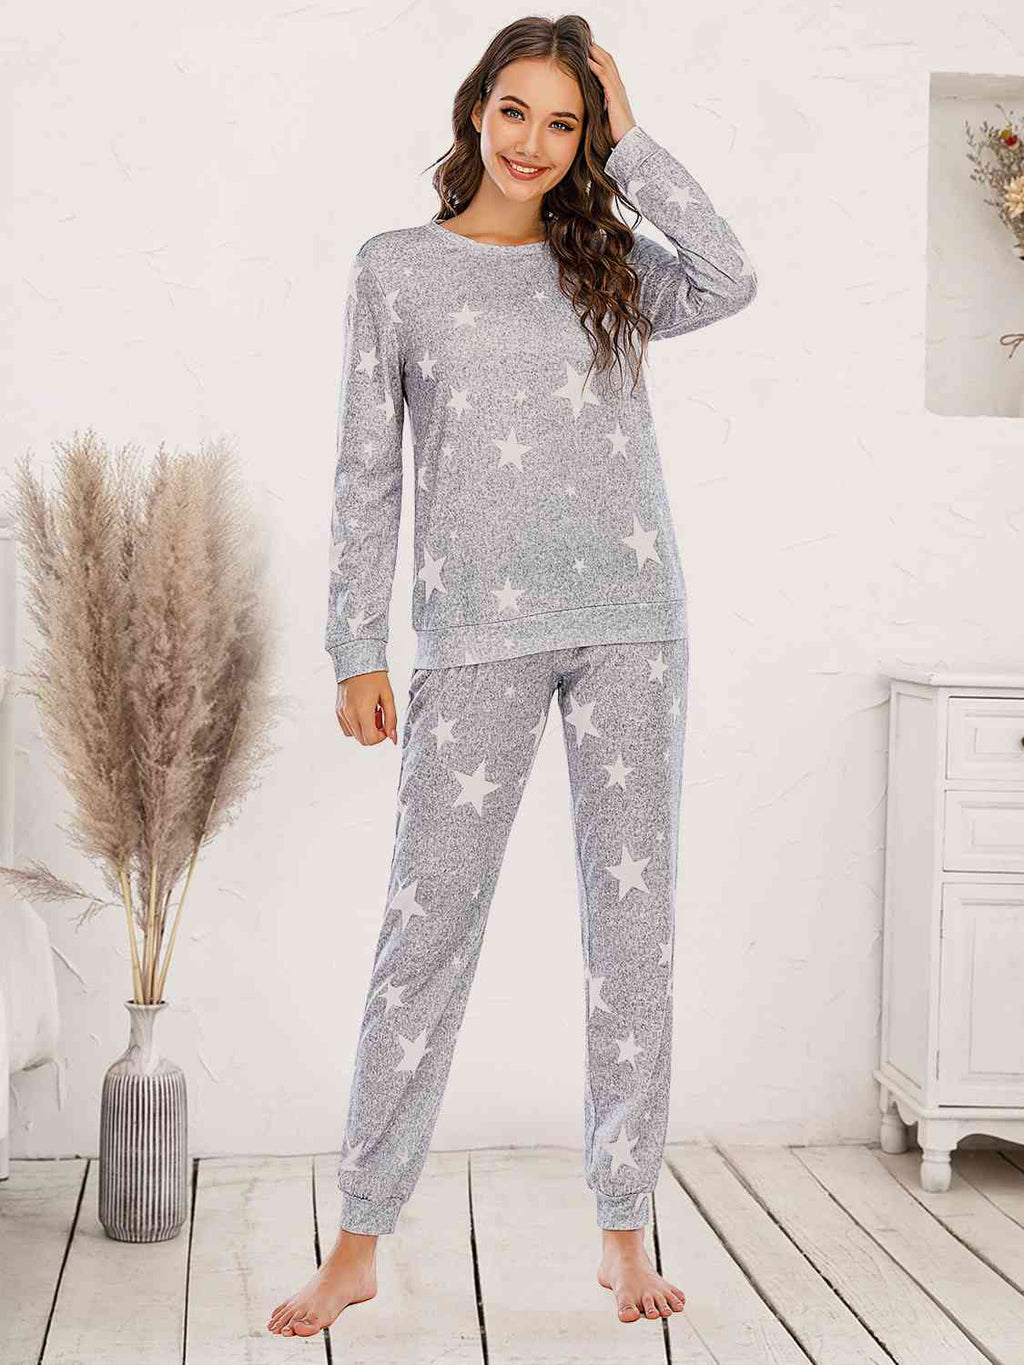 Star Top and Pants Lounge Set (4 Colors) Loungewear Krazy Heart Designs Boutique Heather Gray S 